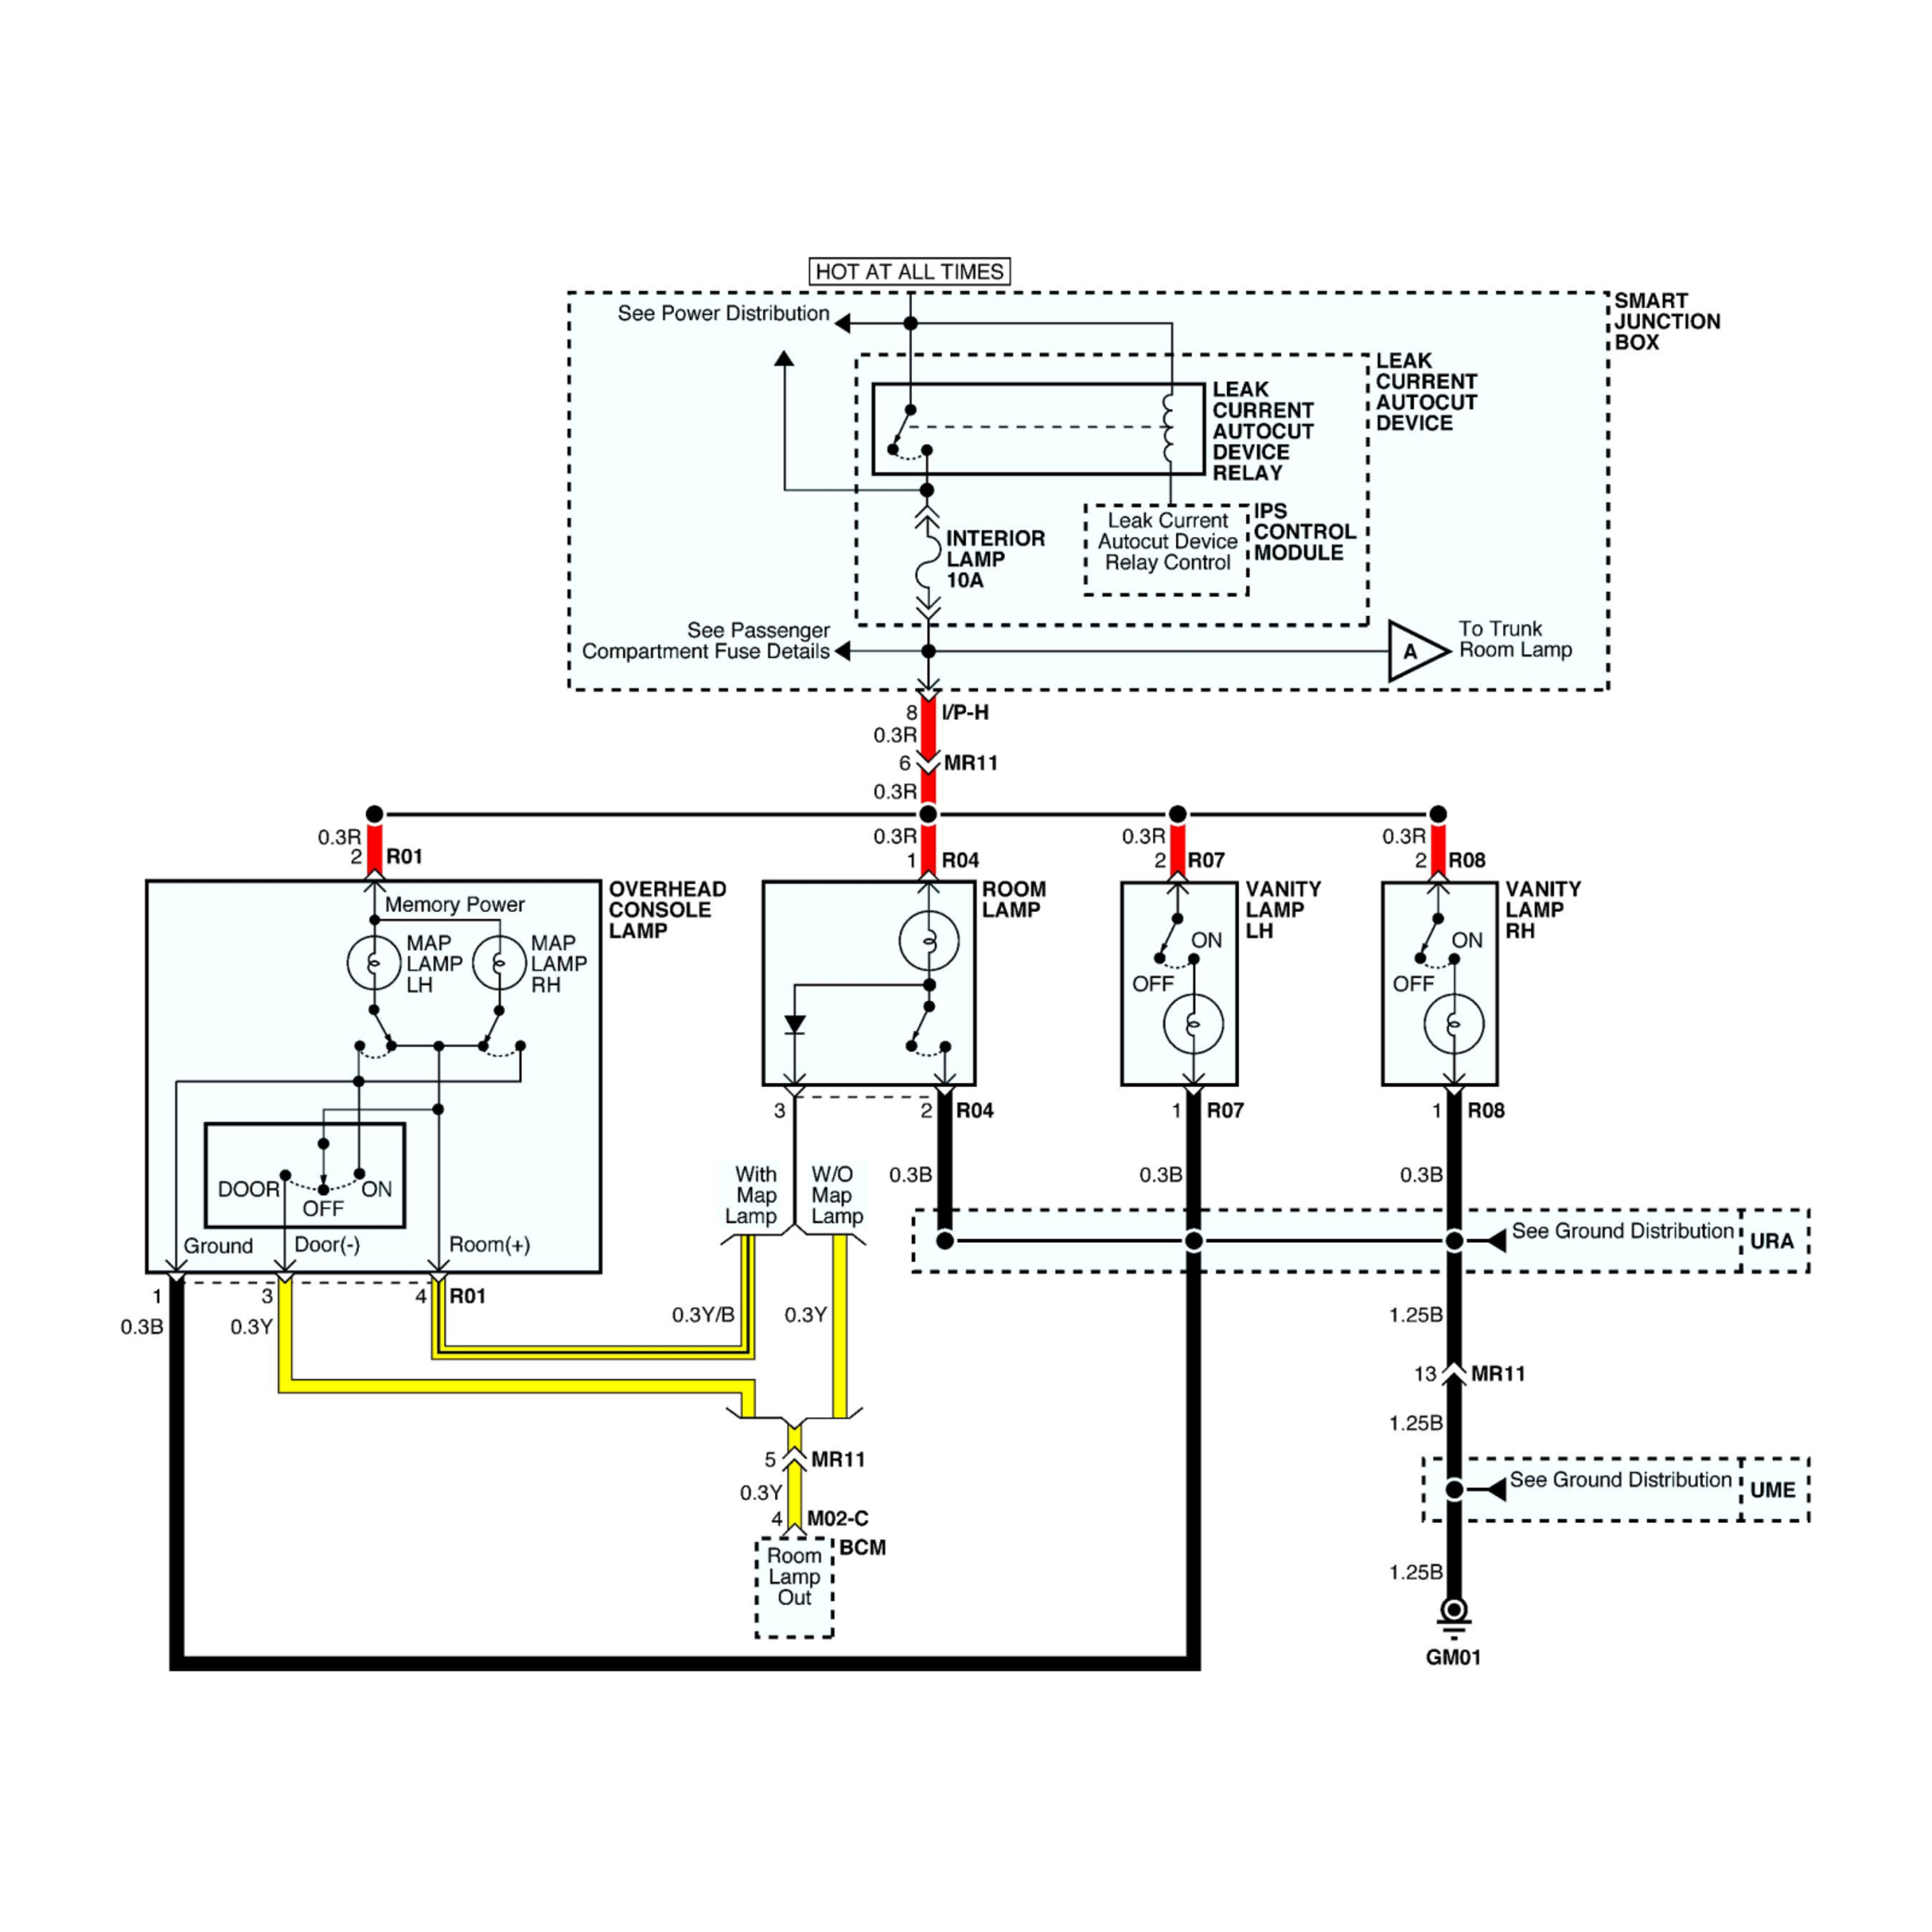 2009 Lincoln MKX wiring diagrams example